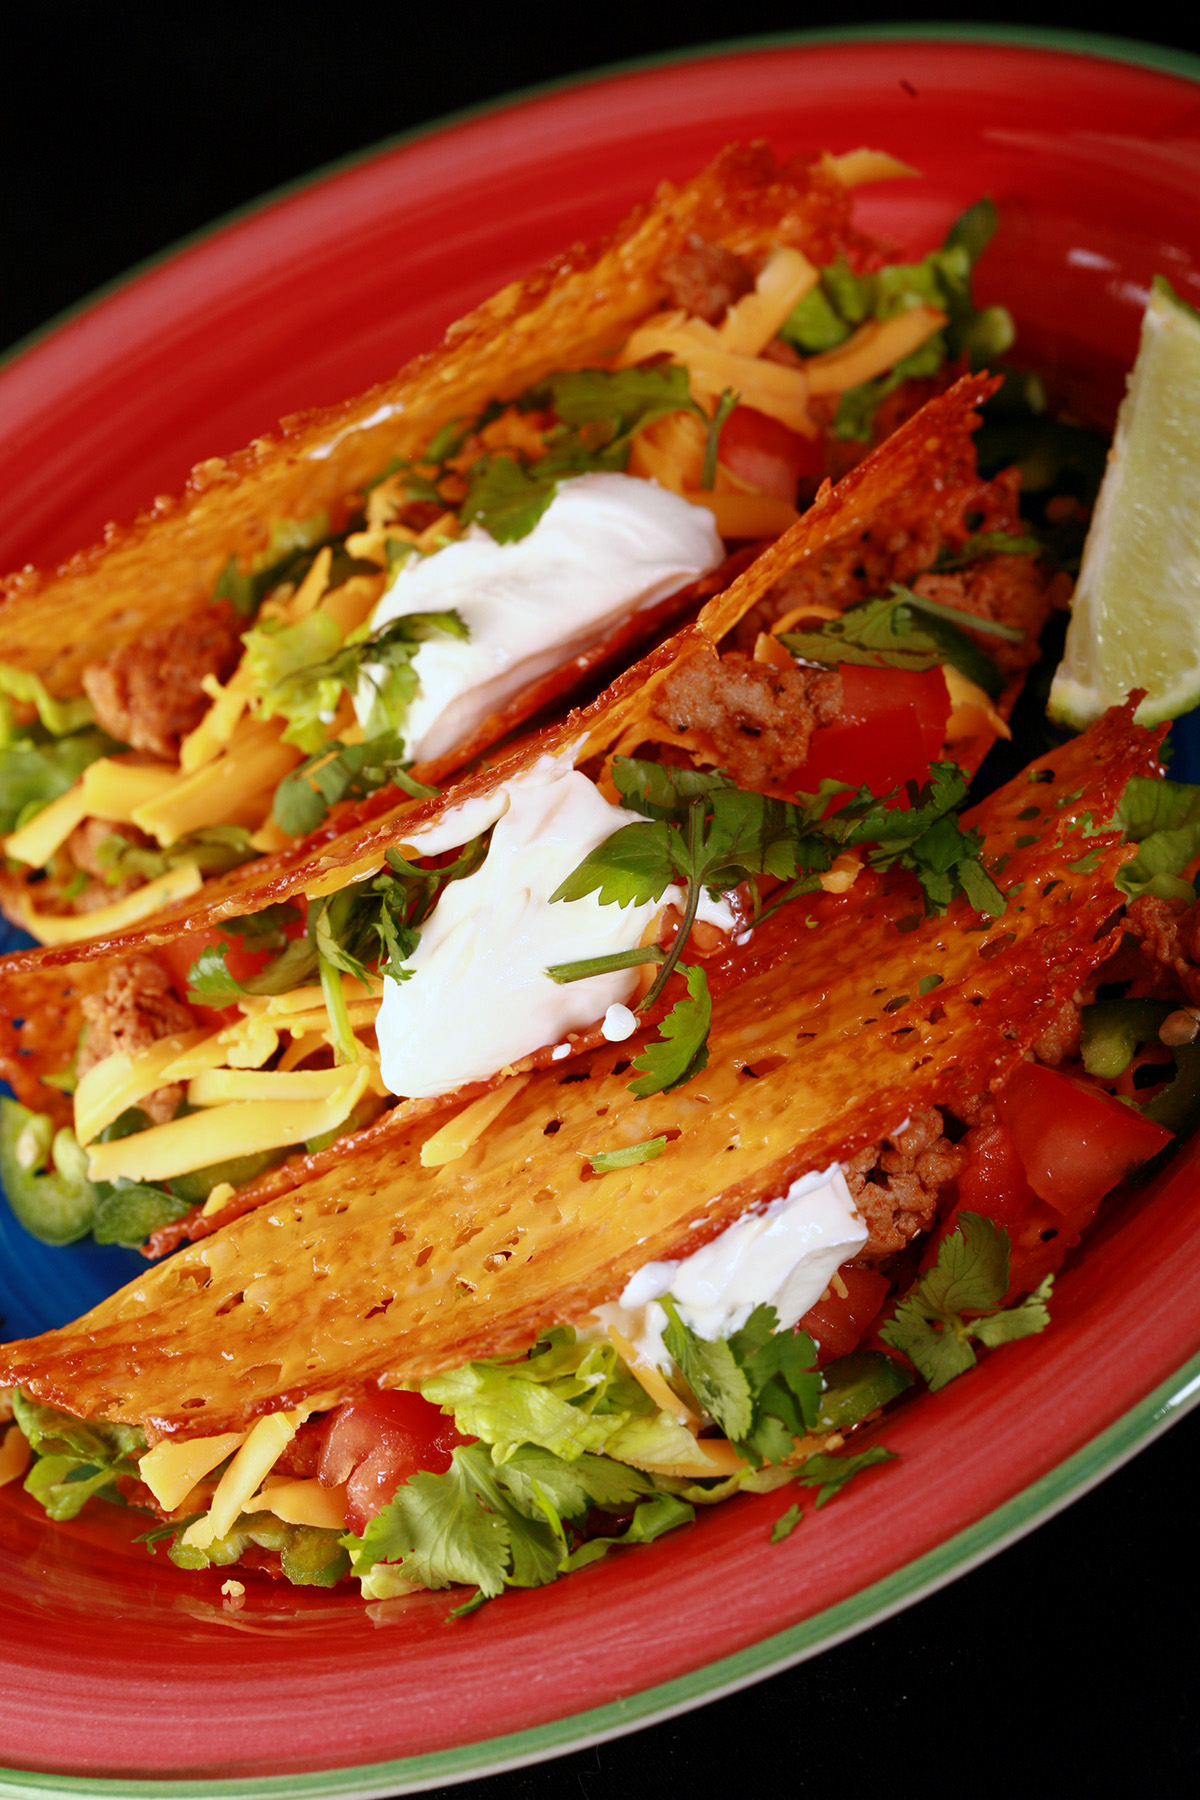 A plate of keto tacos made from cheese taco shells.